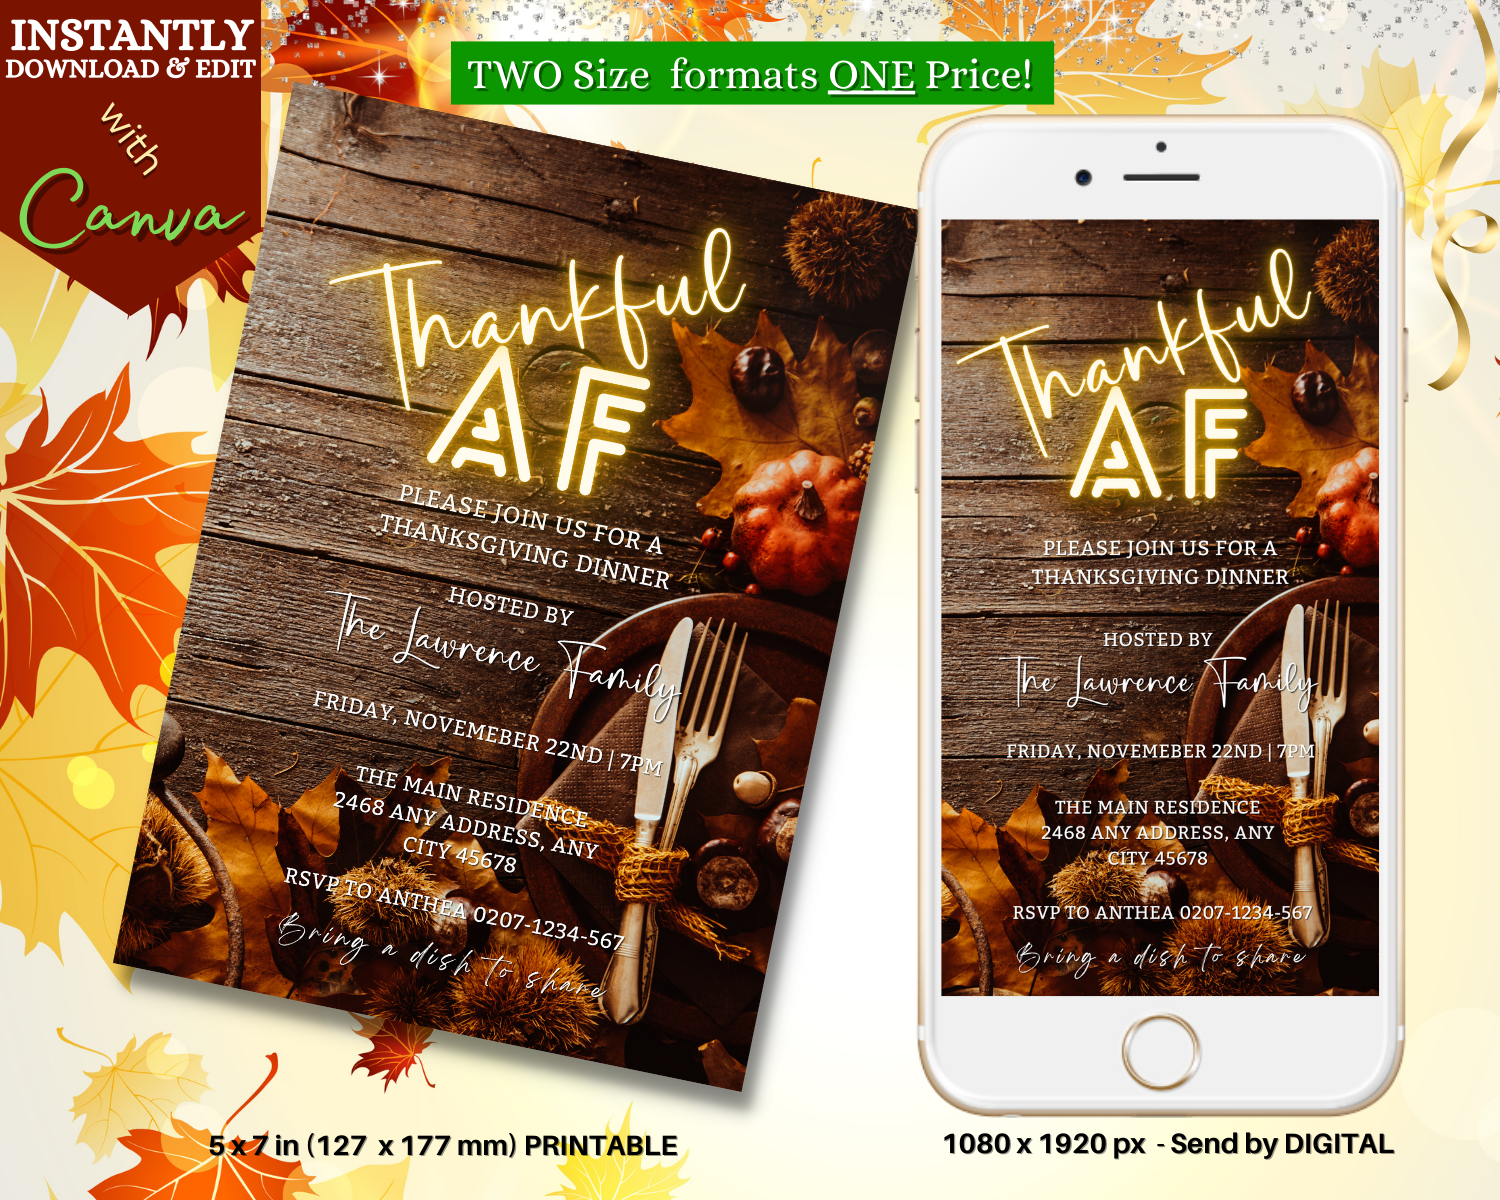 Thankful AF Neon Wooden Table | Thanksgiving Dinner Evite displayed on a phone screen with a customizable template for digital invitations.